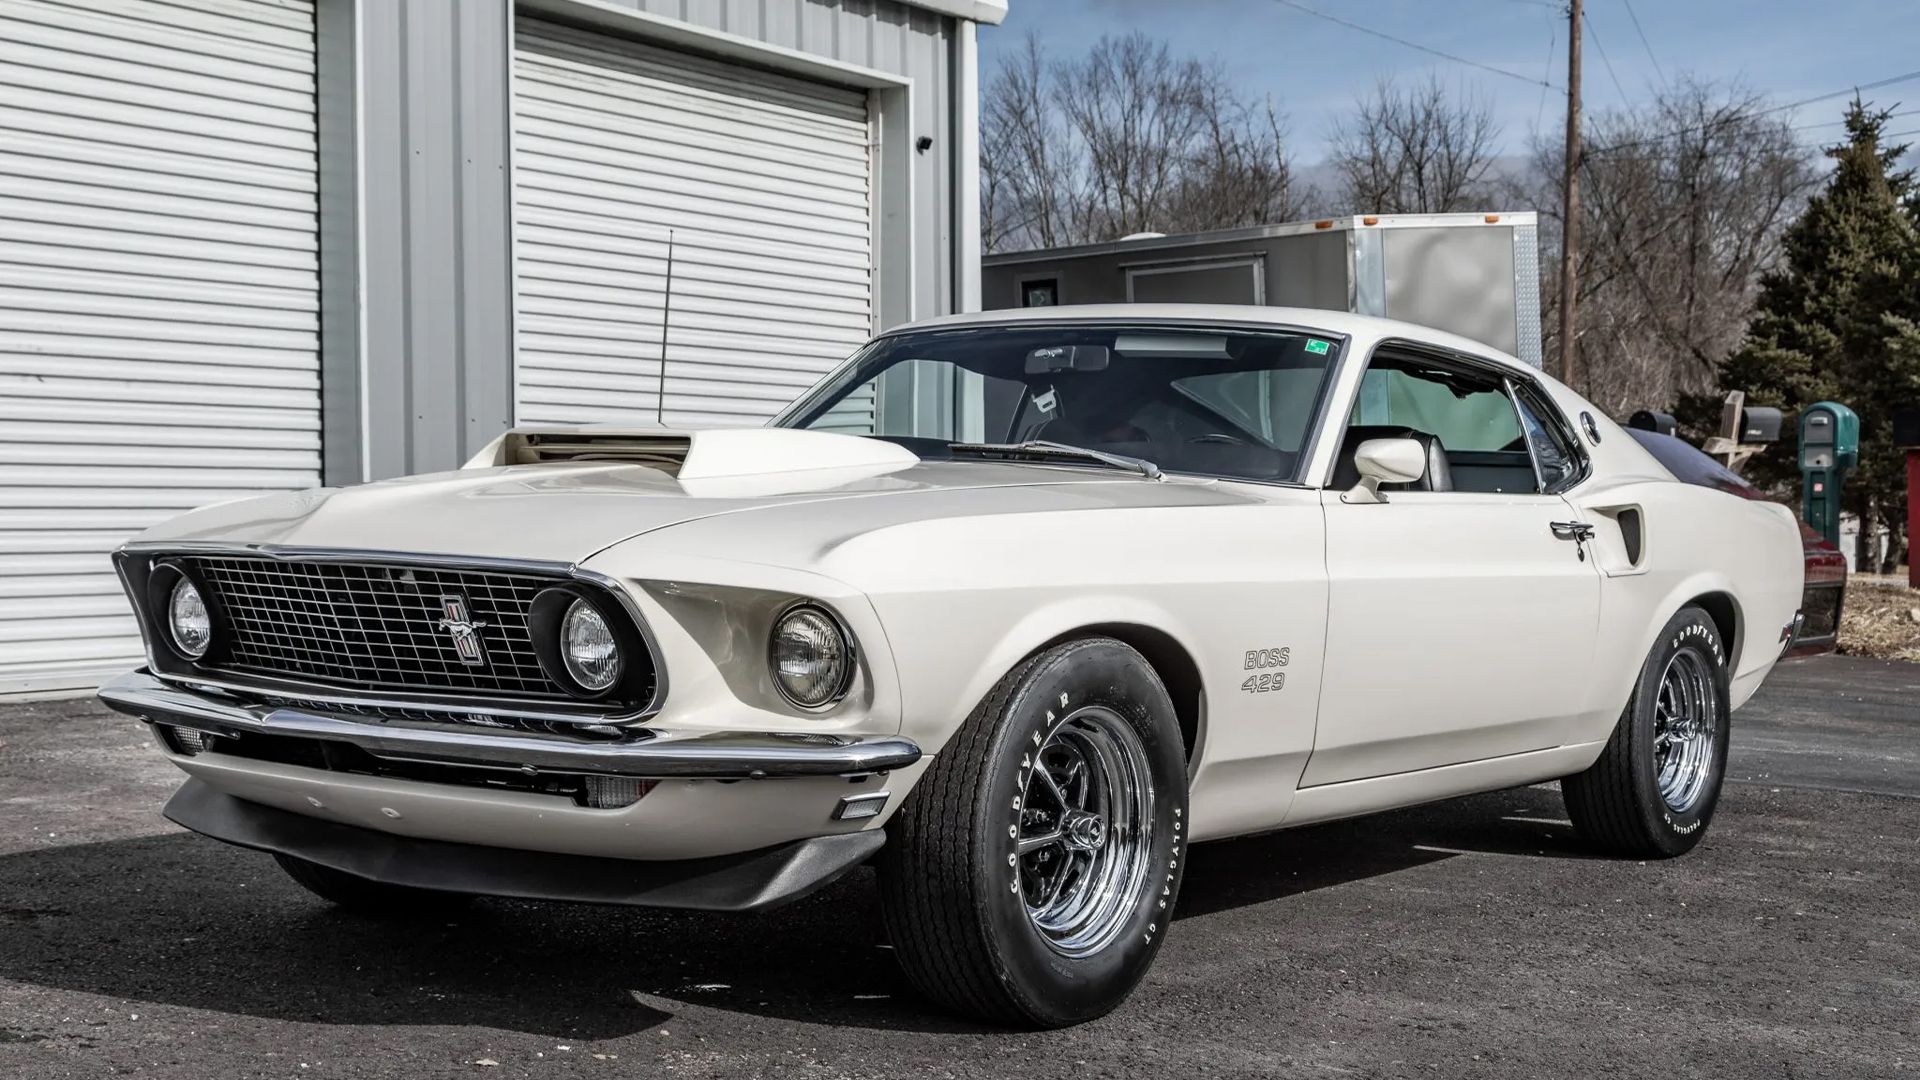 Ford Mustang Boss 429 - Front 3_4 angle in white